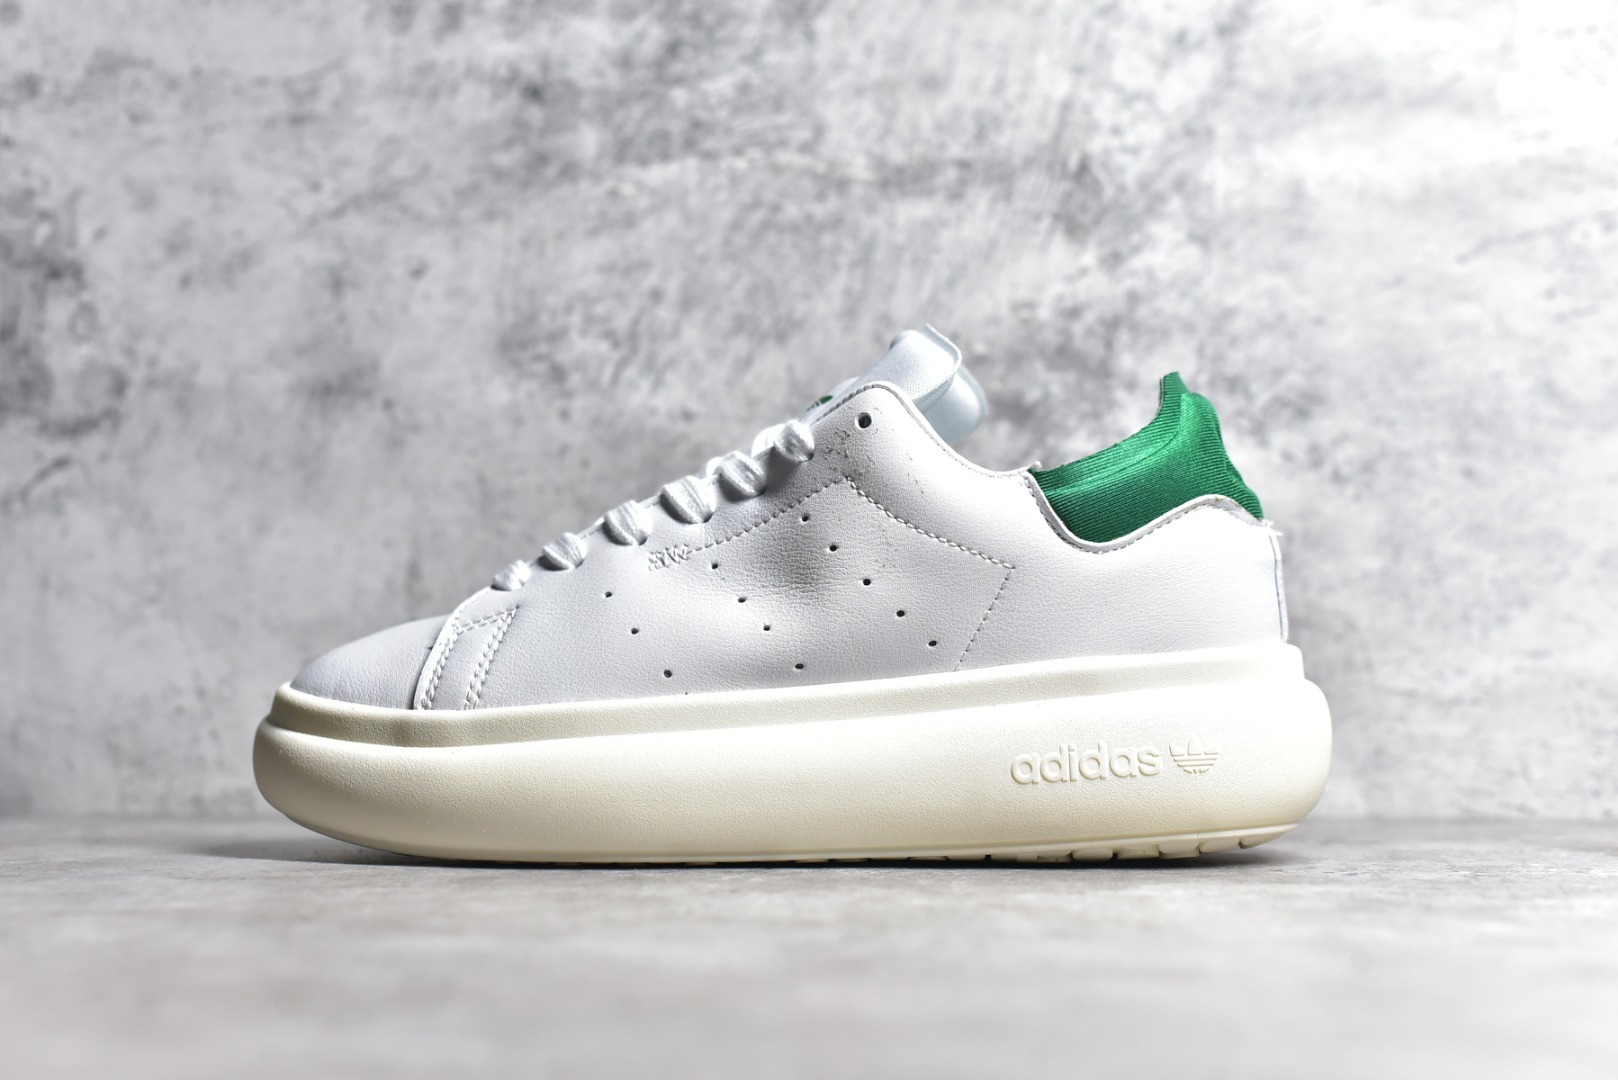 Adidas Smith series low cut classic versatile sneakers